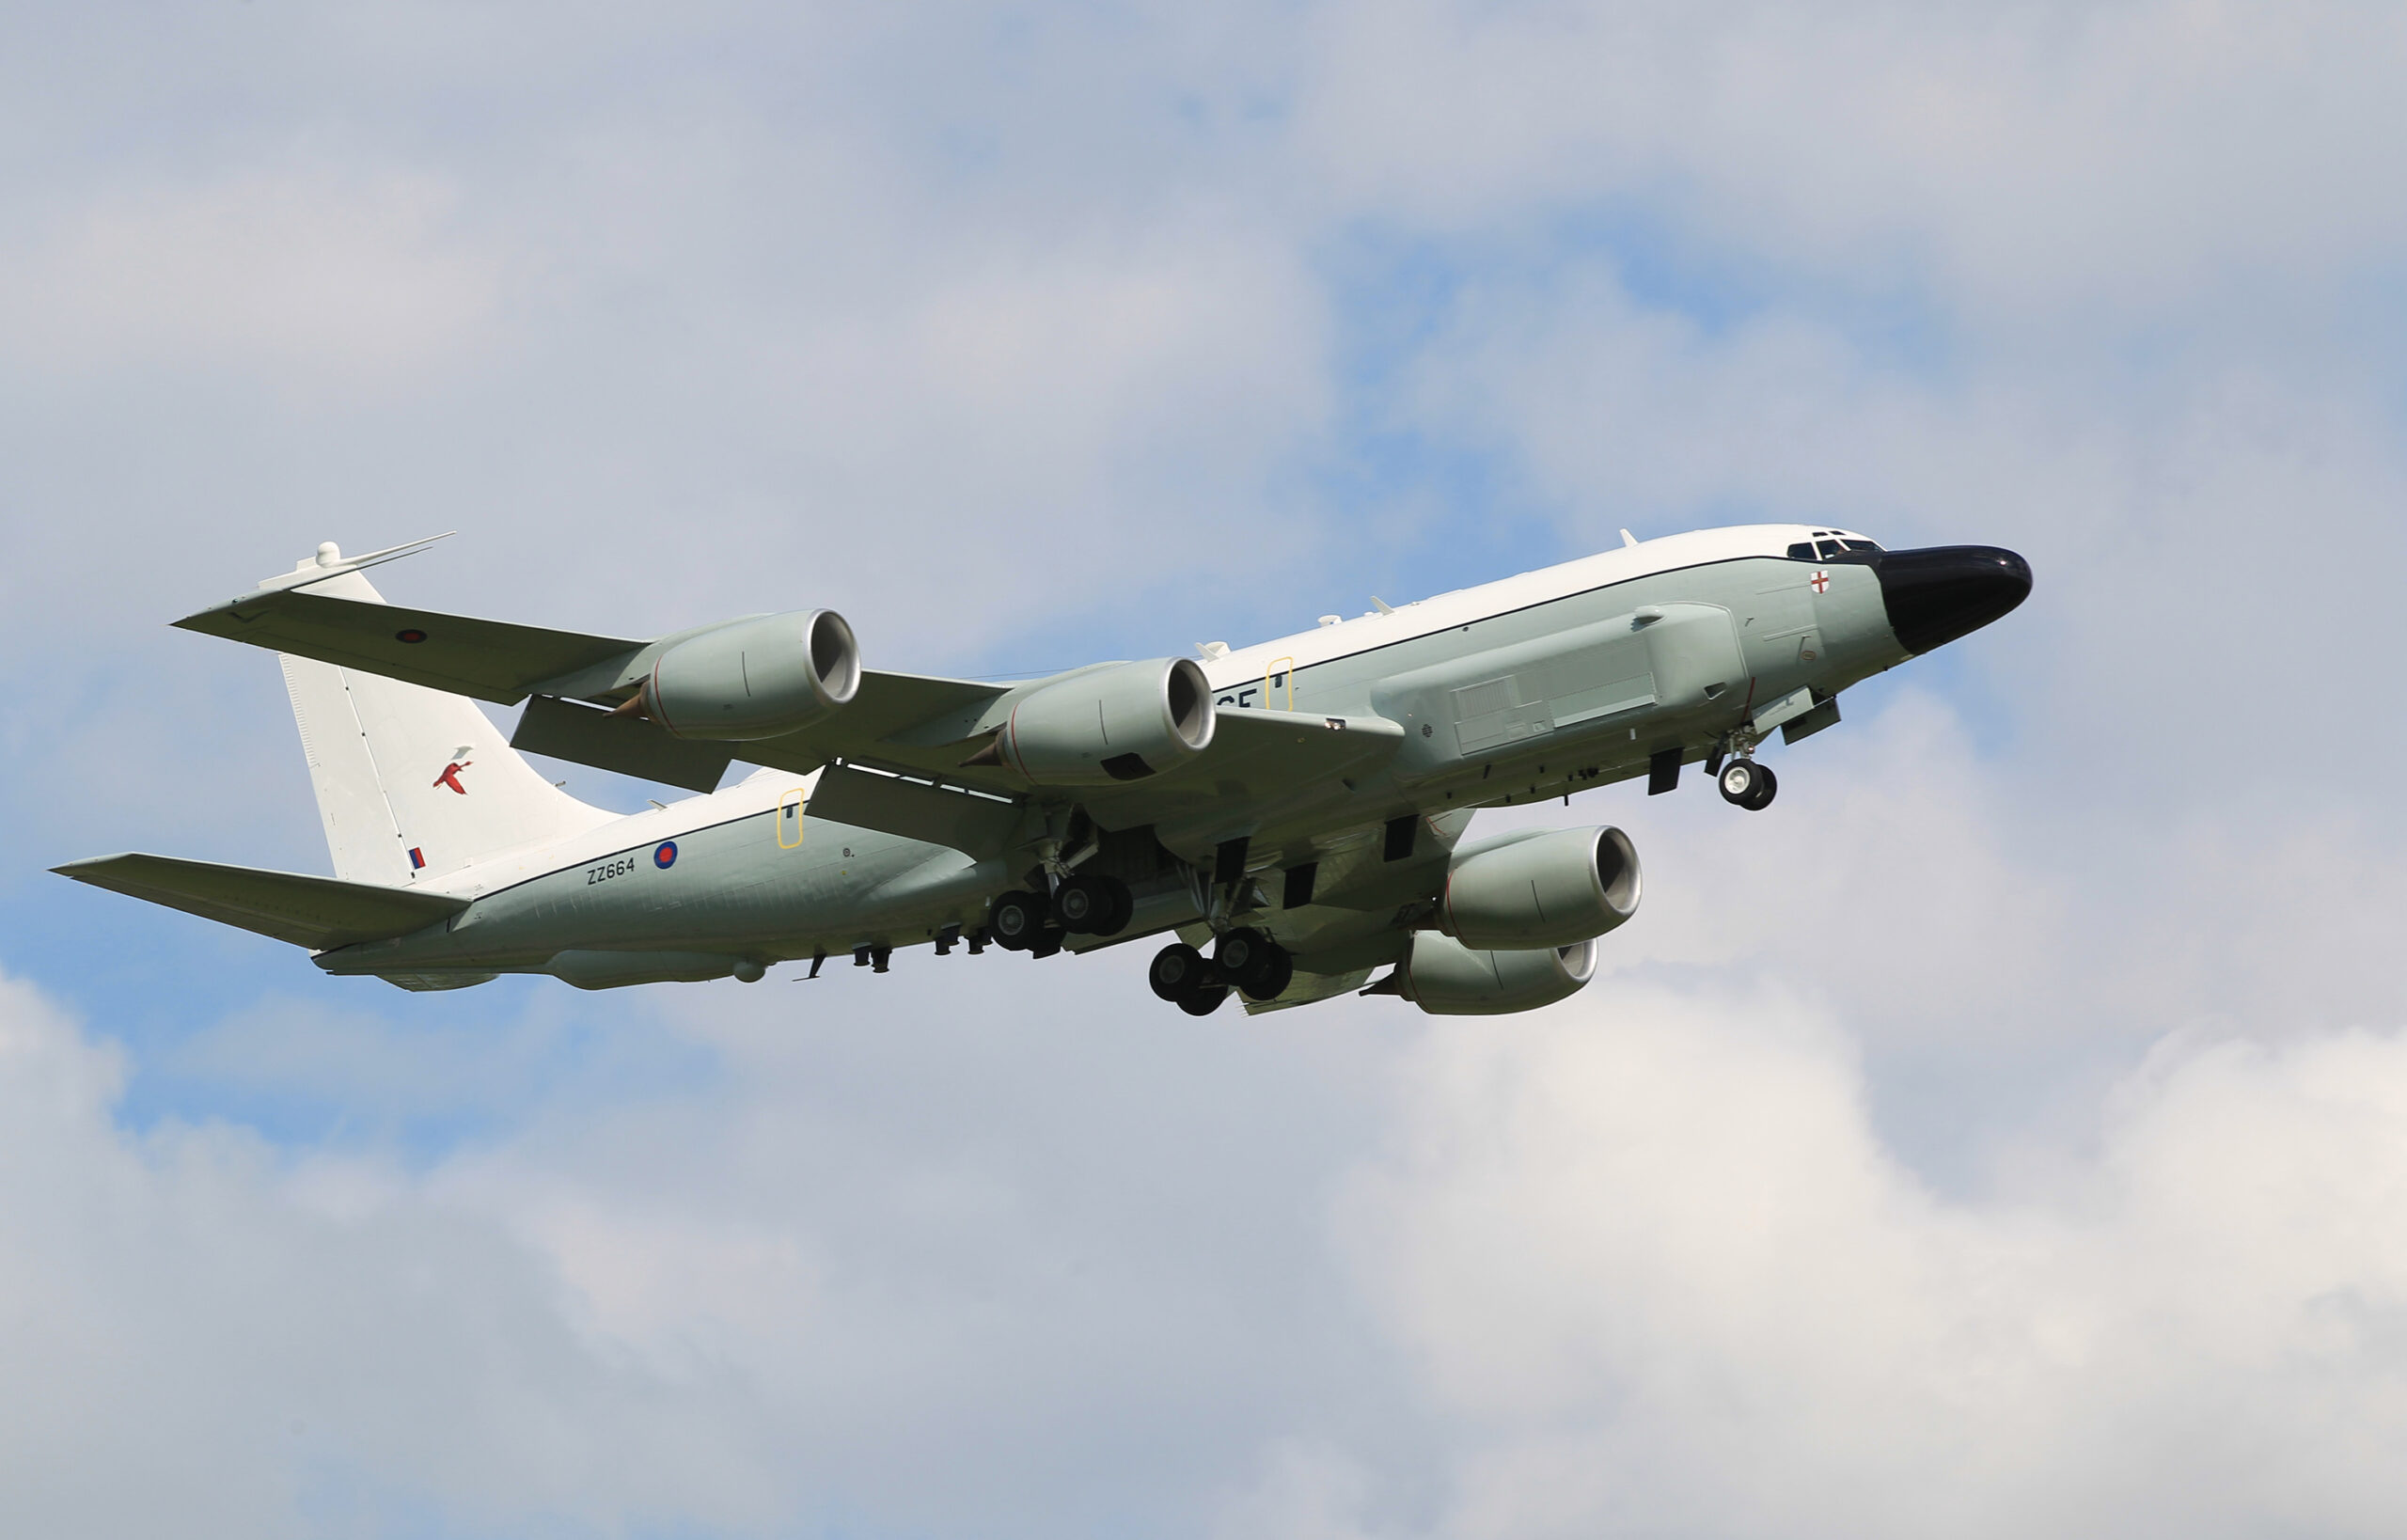 Advanced British Spy Aircraft Spotted Flying Near Russian Bases On Syria's Coast